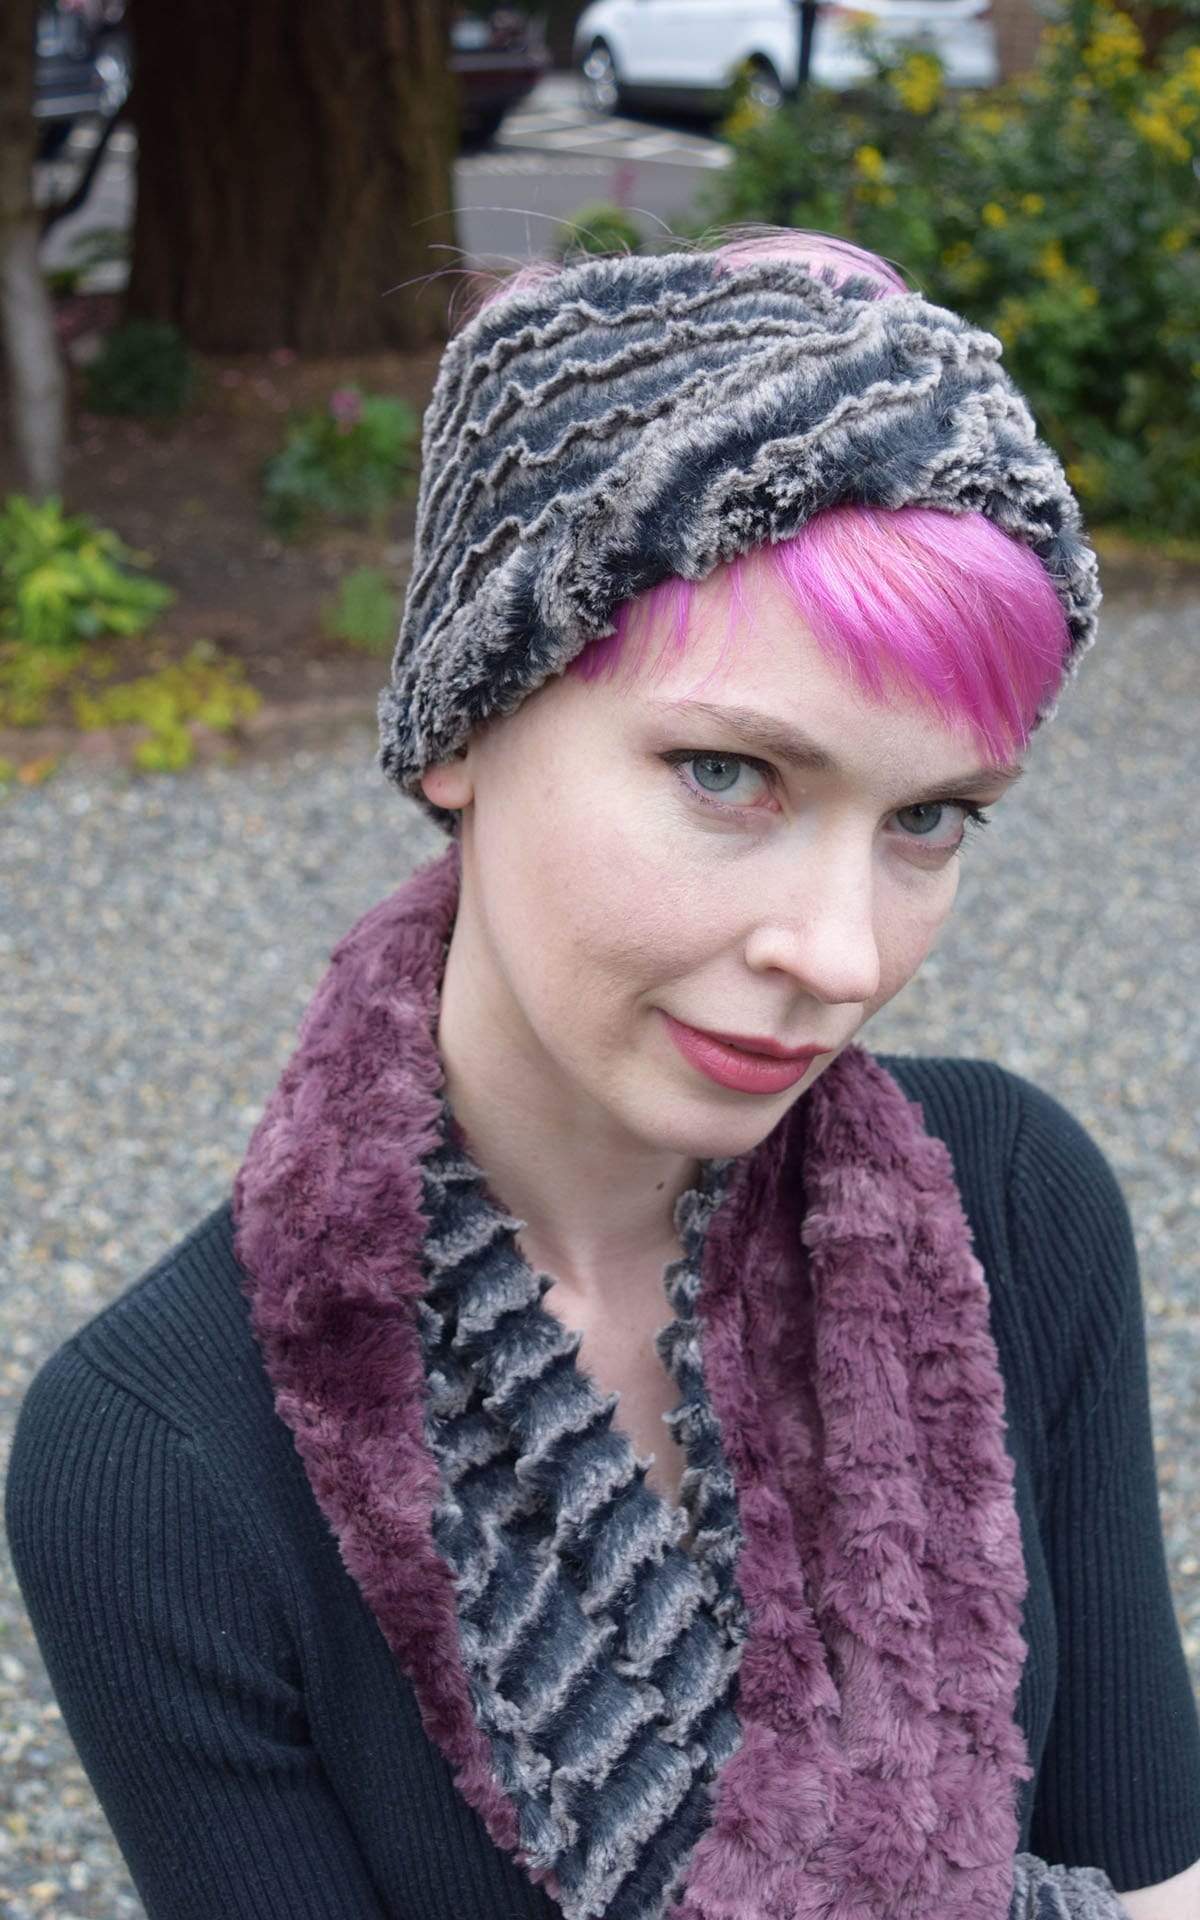 Model outside wearing Headband and matching scarf | Desert Sand in Charcoal, Gray and Black Faux Fur | Handmade by Pandemonium Millinery Seattle, WA USA